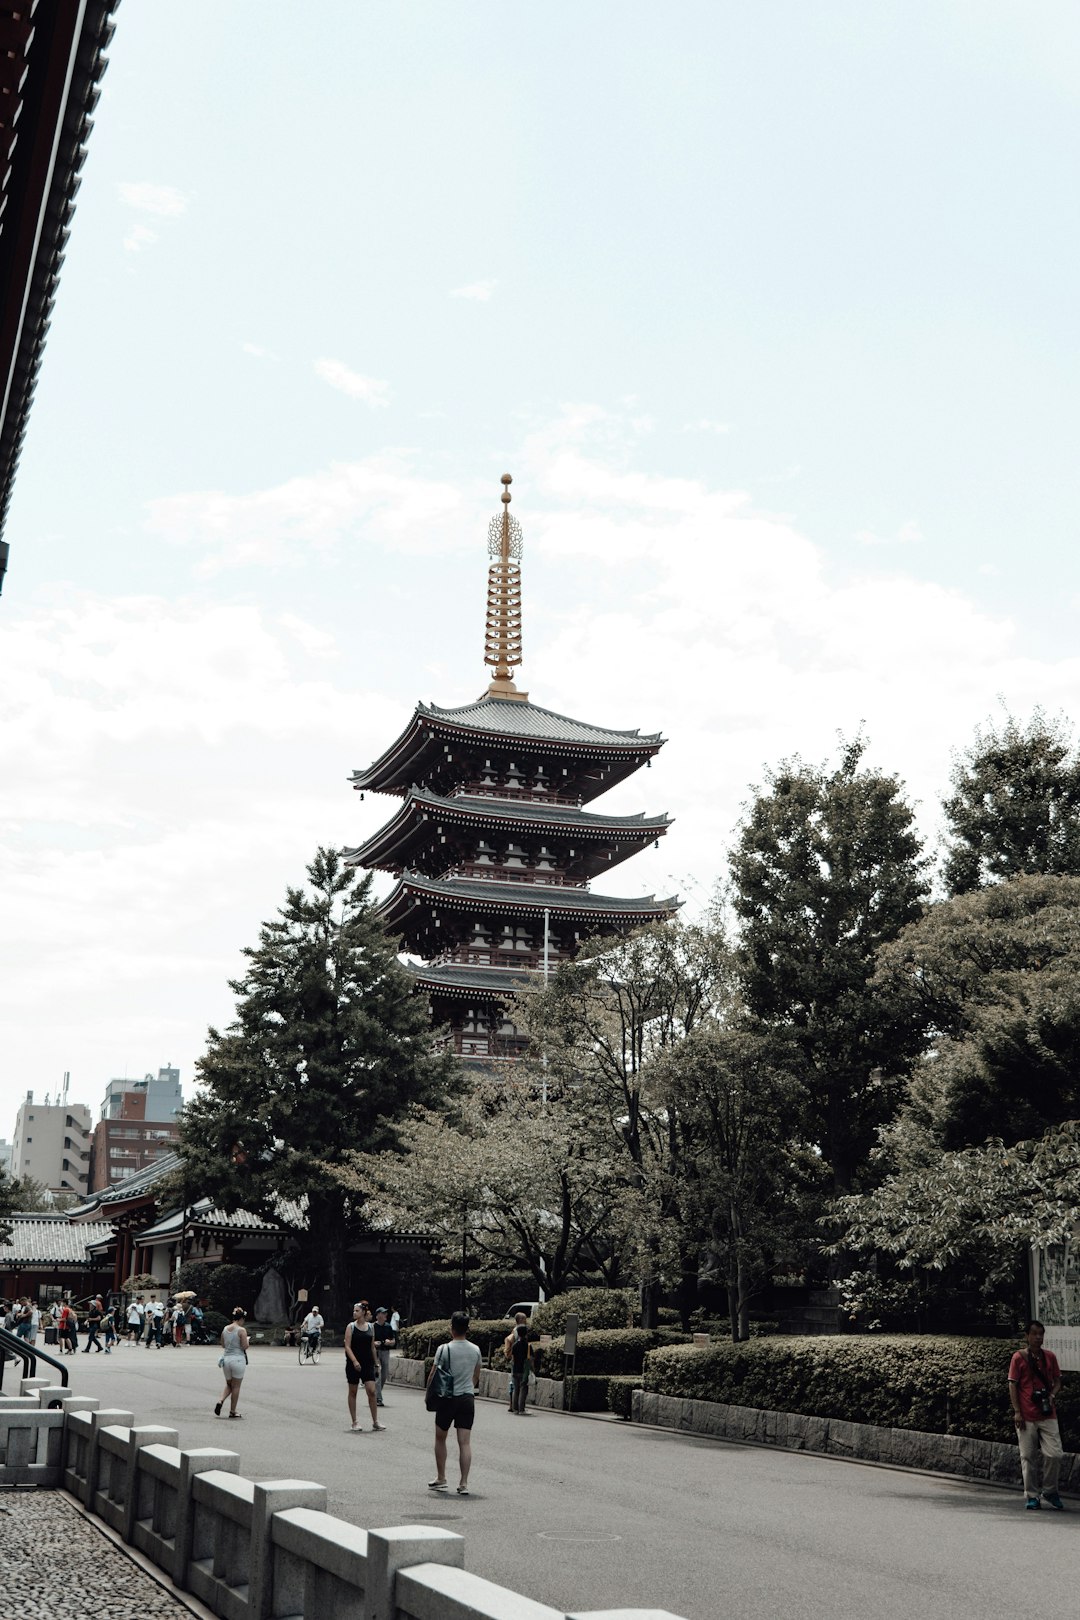 Travel Tips and Stories of Tokio in Japan